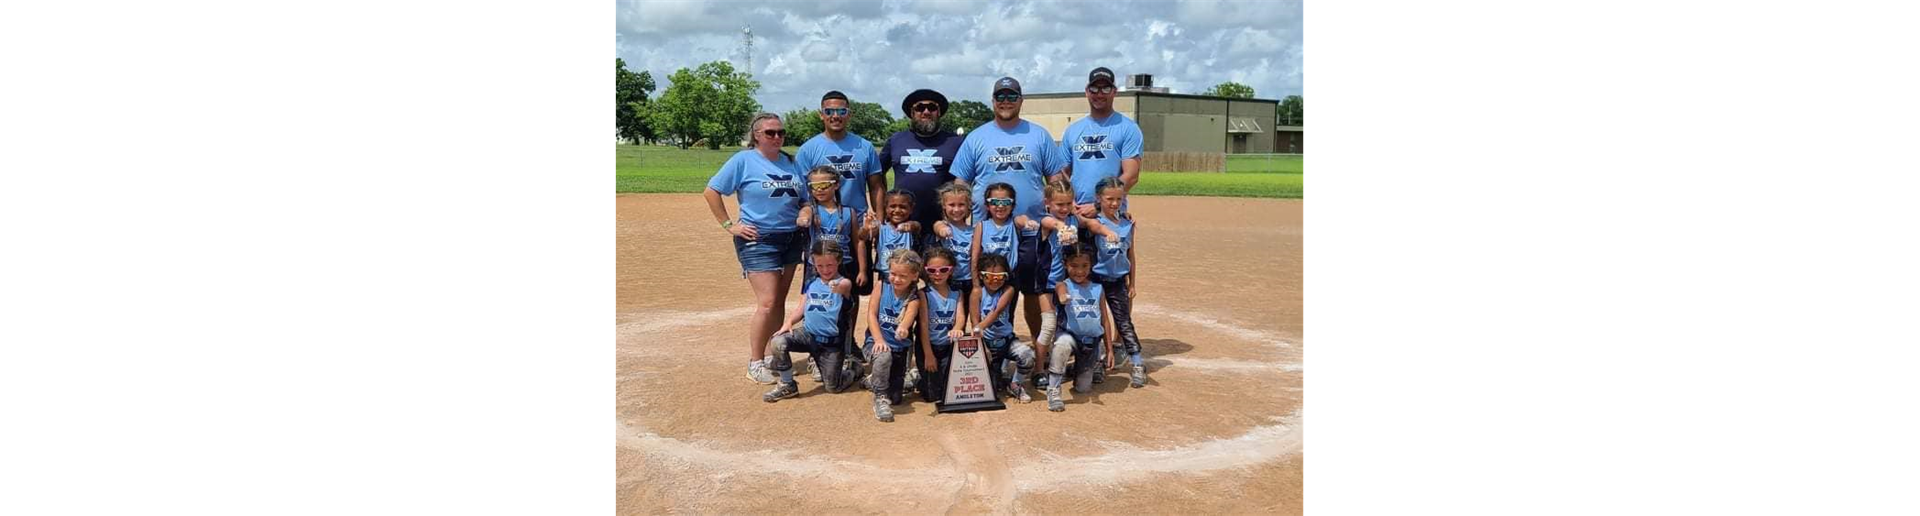 2021 Extreme 6u 3rd Place State!